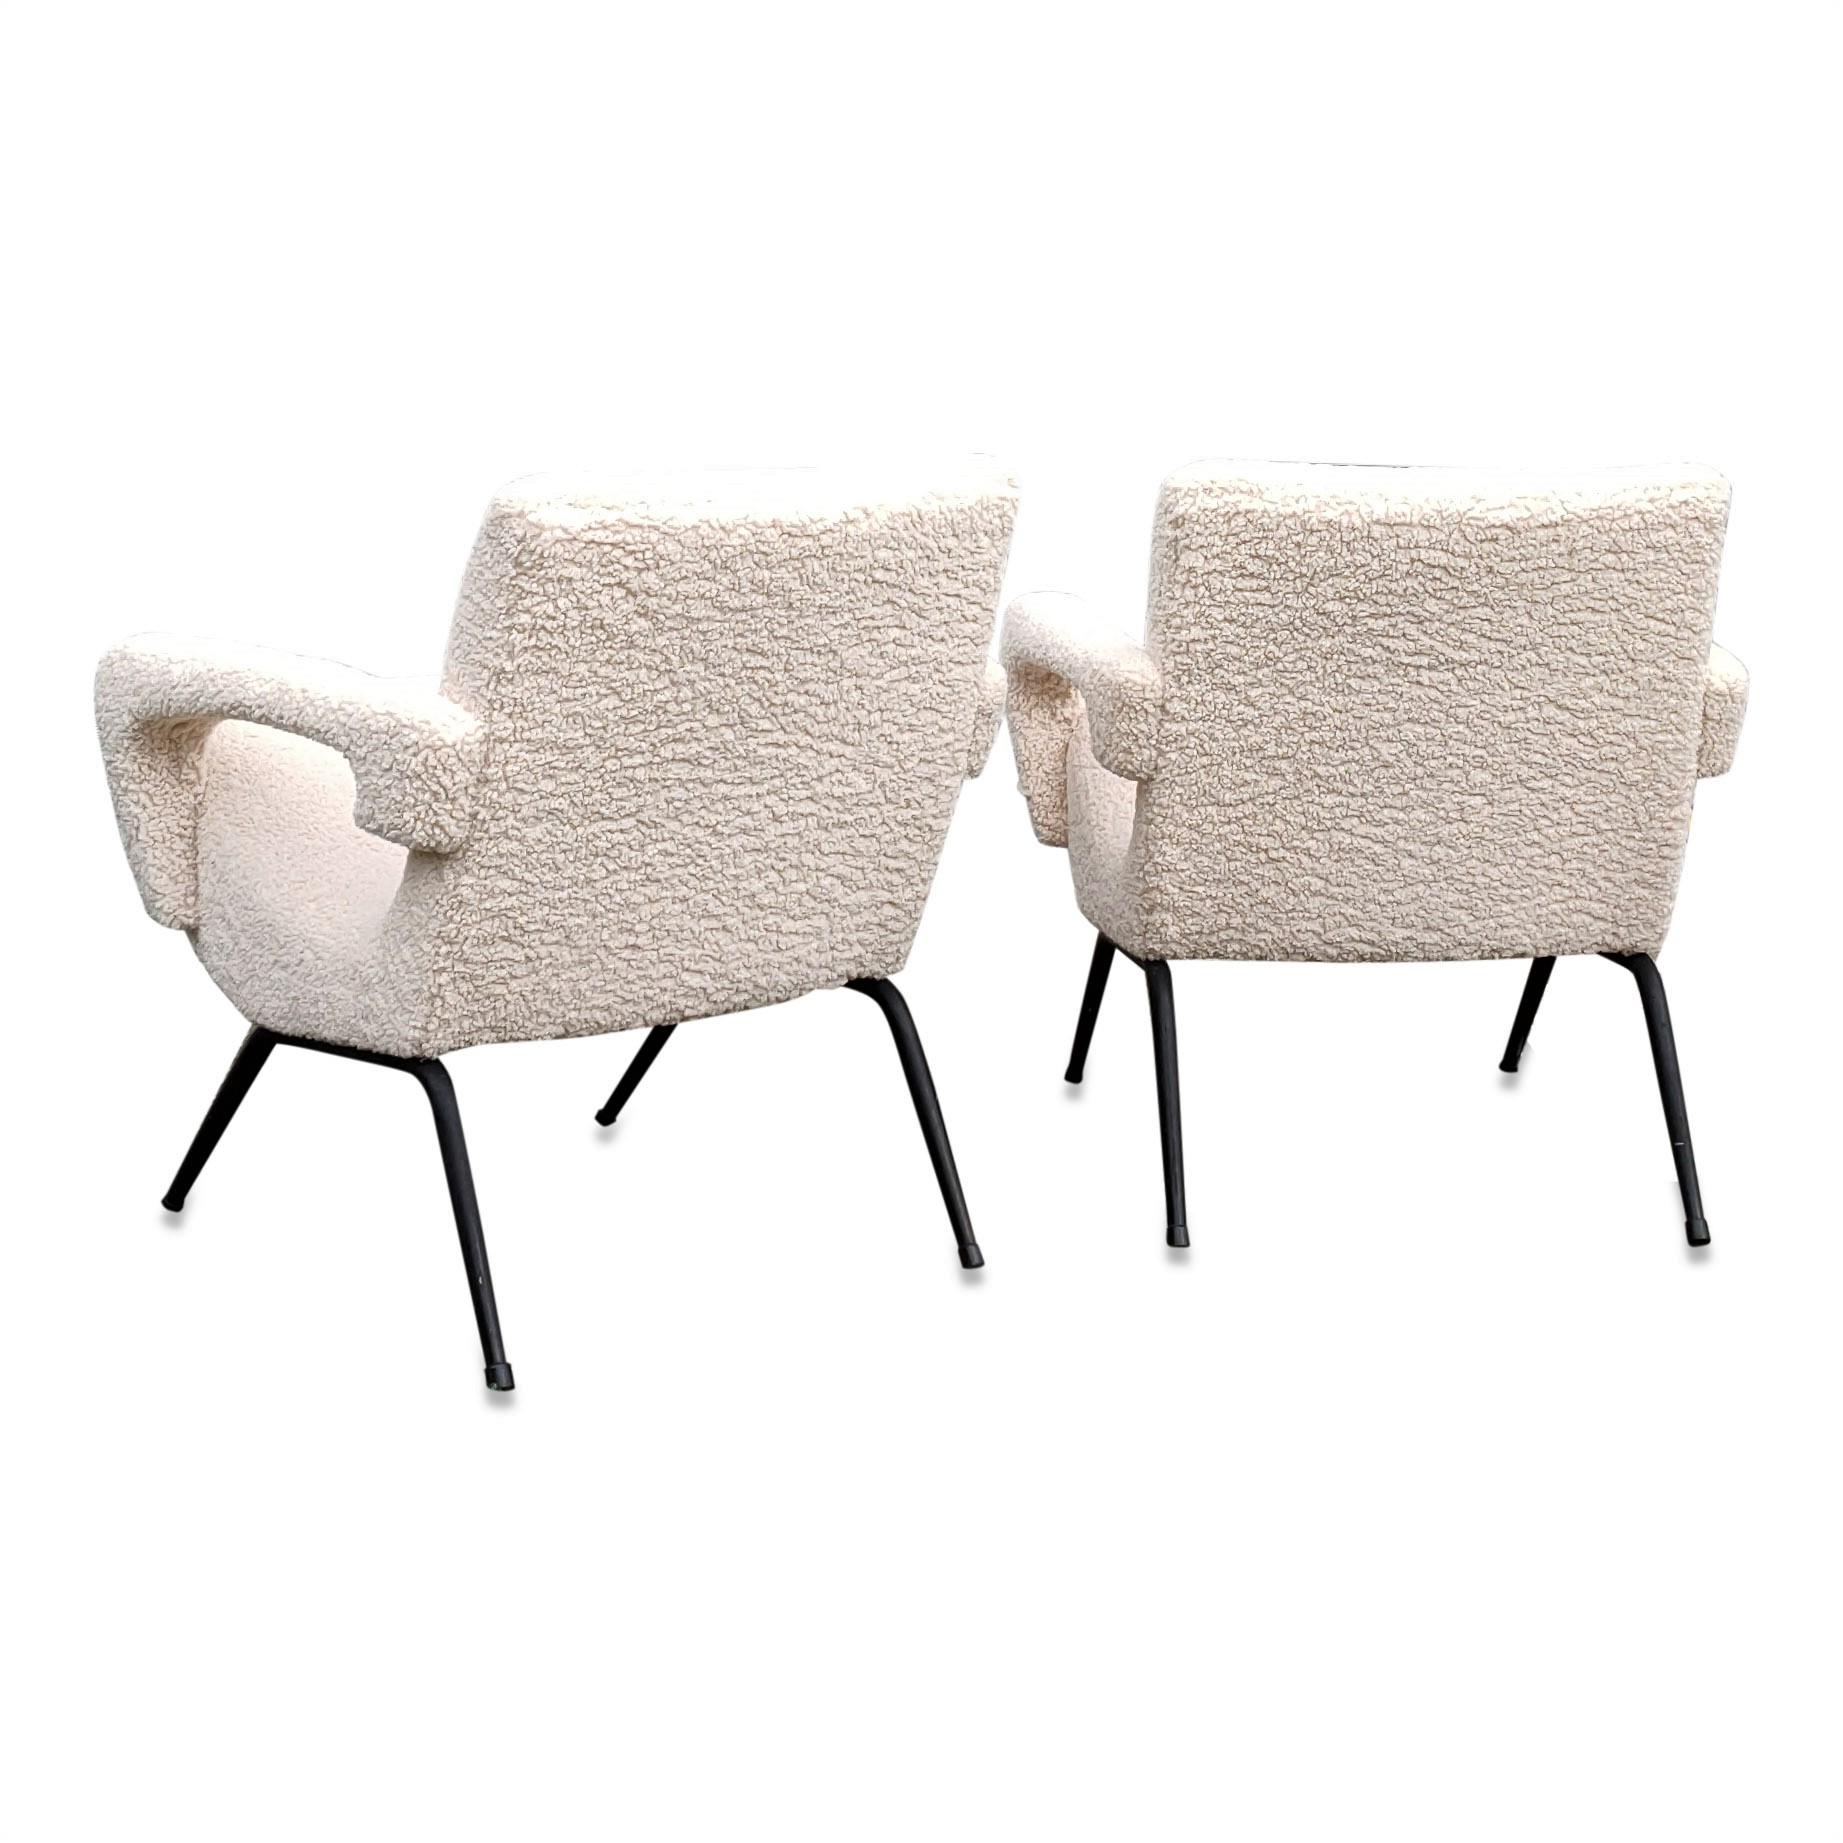 Pair of compact armchairs
freshly re-upholstered
these chairs will ship from Paris France and can be returned to either France or NY USA location
price does not include shipping nor possible customs related charges
for safer shipping, feet will